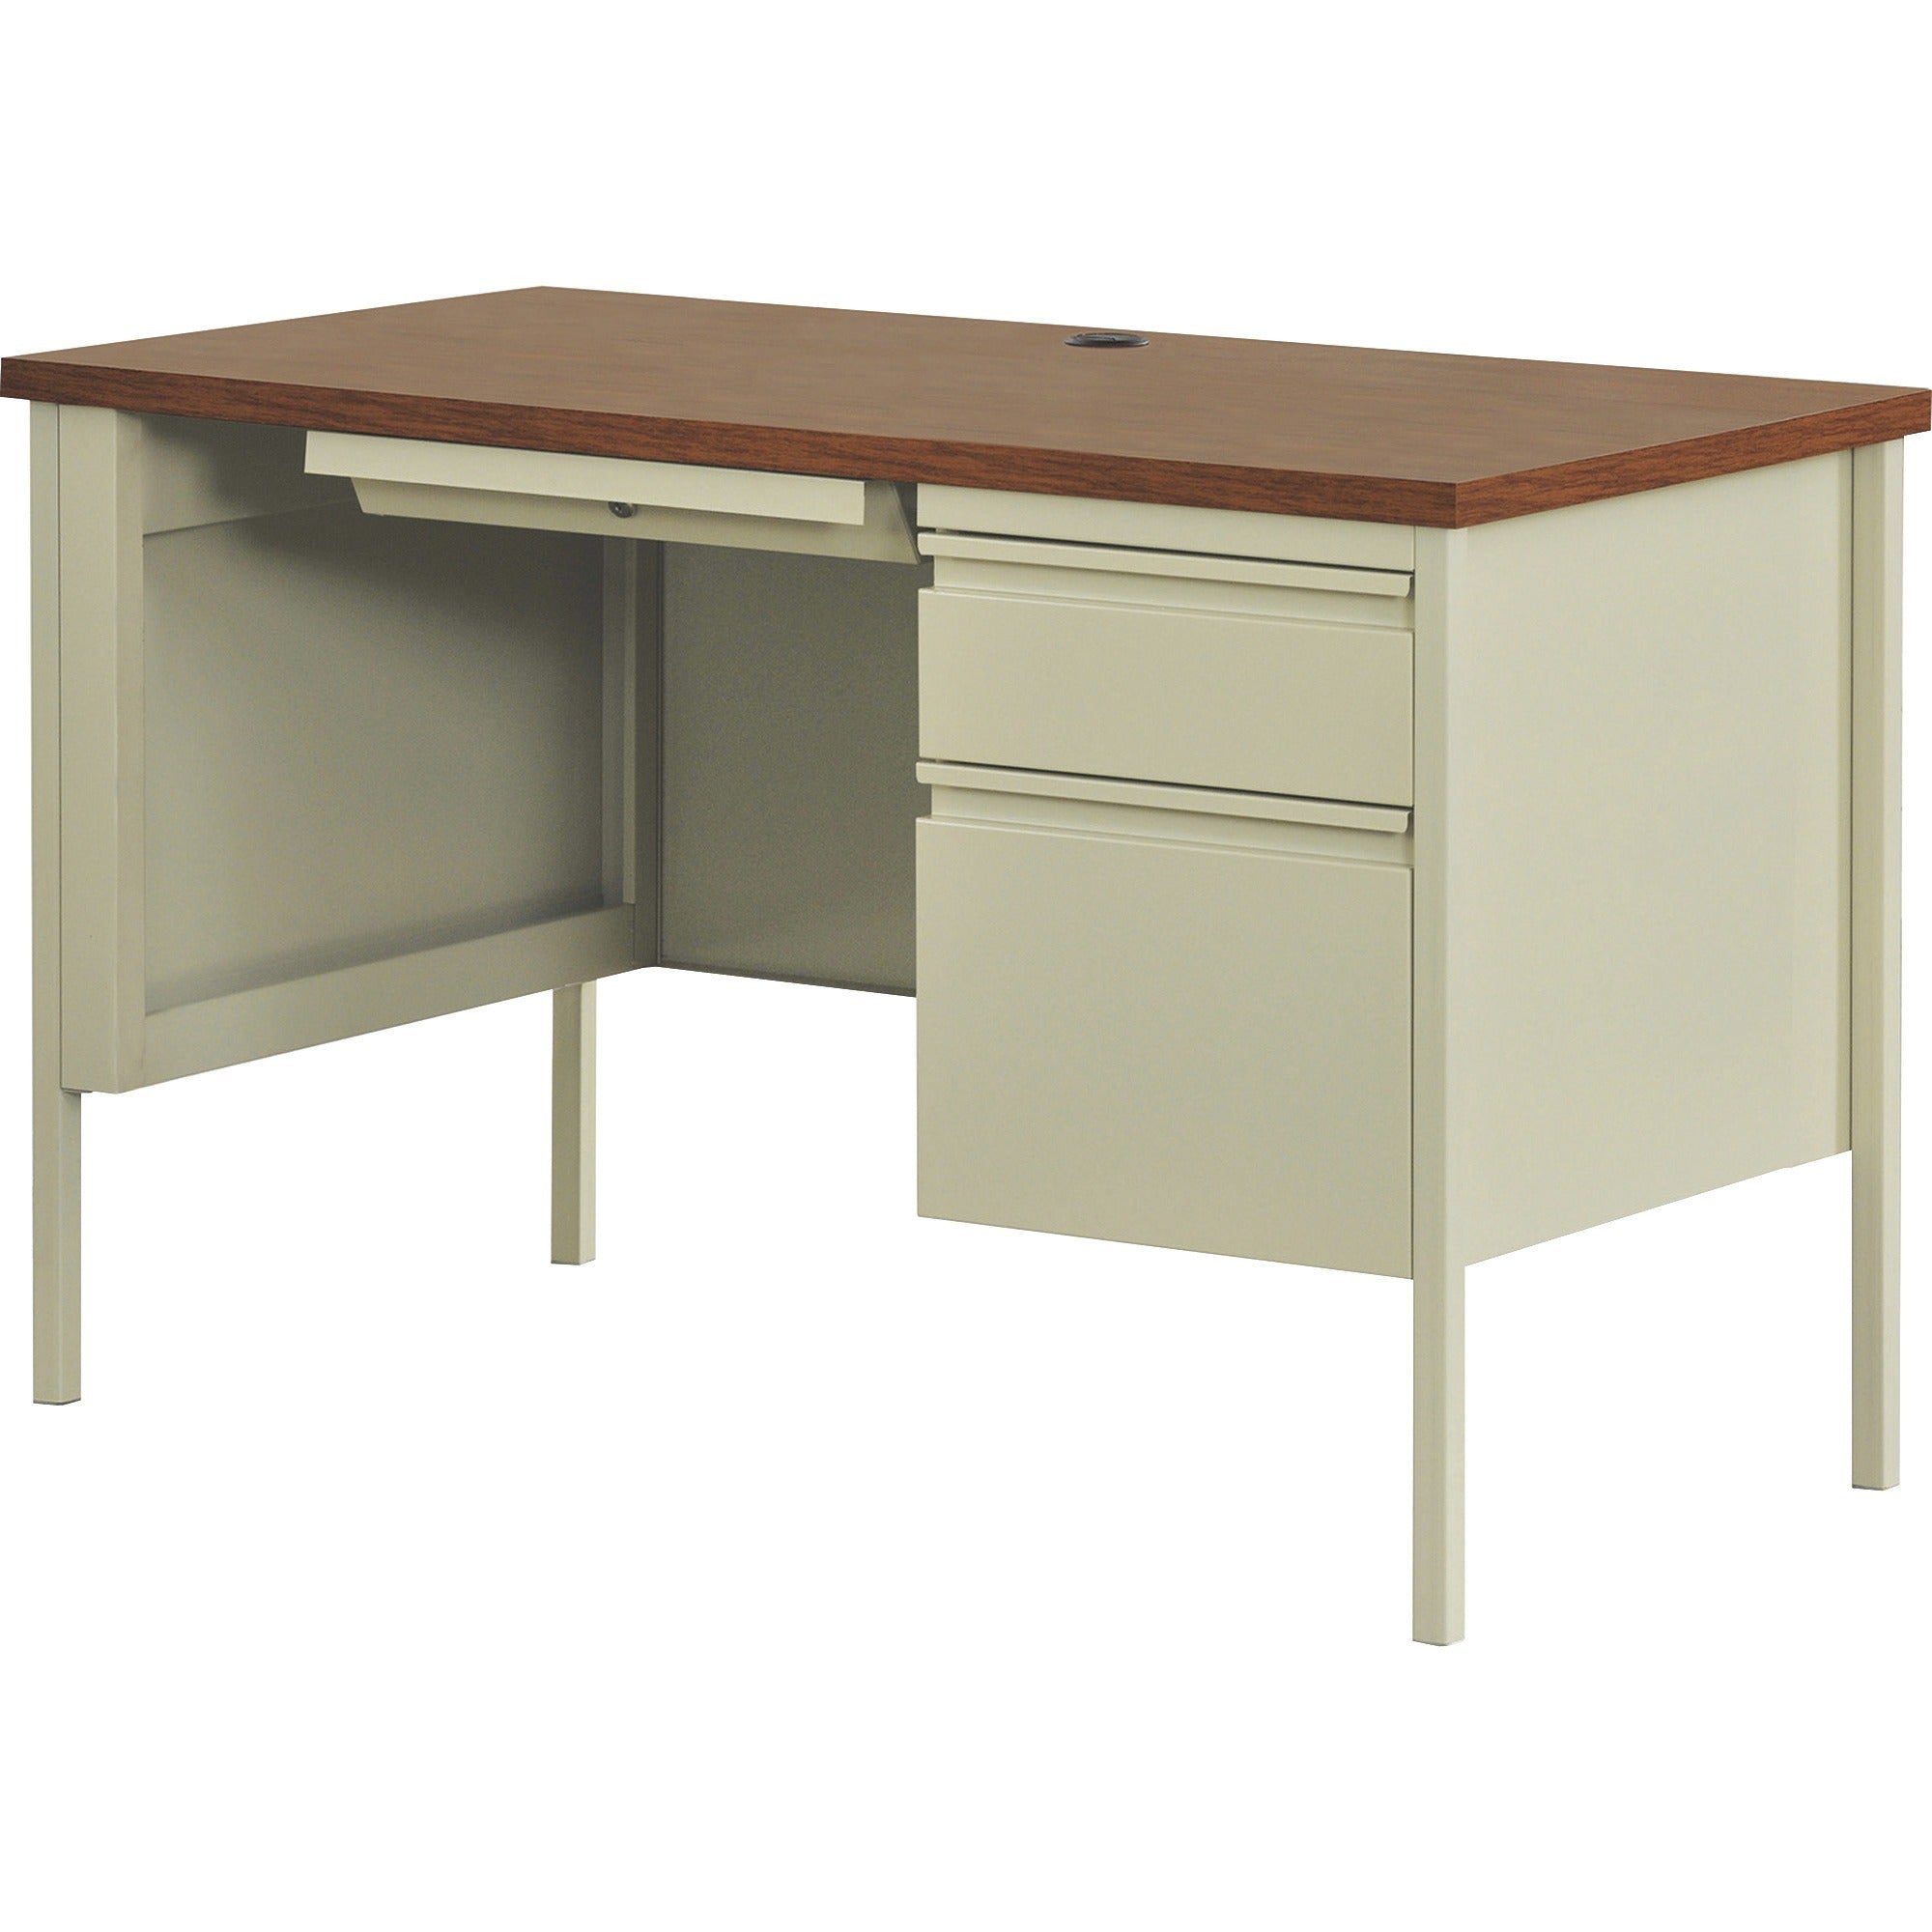 lorell-fortress-series-45-1-2-right-single-pedestal-desk-455-x-24295--11-table-top-box-file-drawers-single-pedestal-on-right-side-square-edge_llr66947 - 3